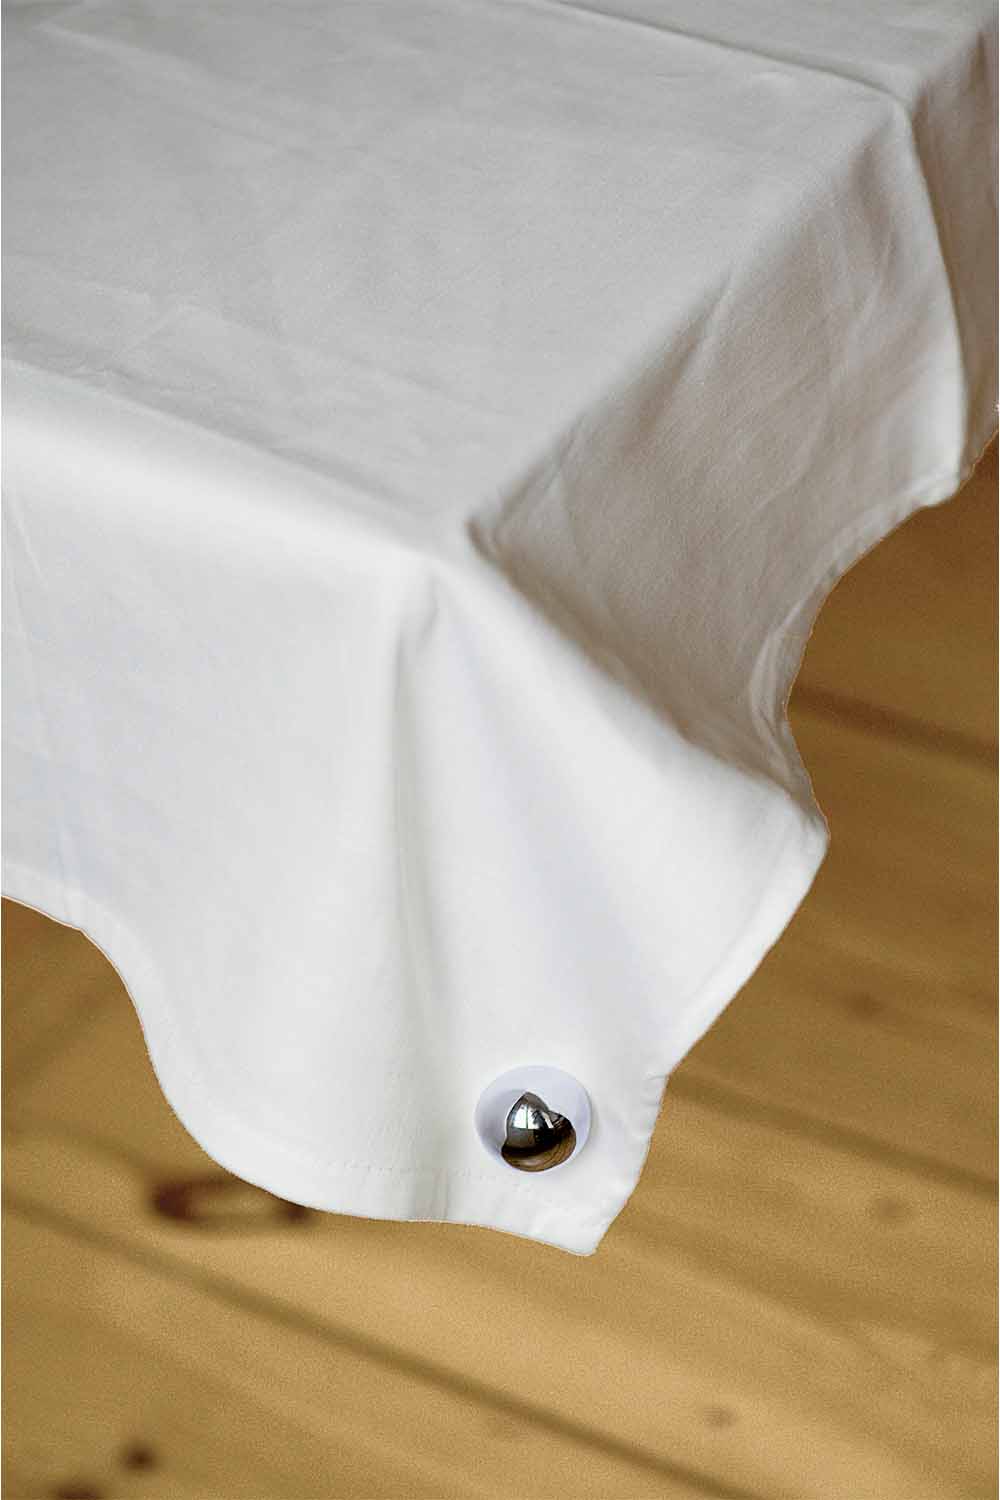 Gravity Tablecloth Magnet Ball, Set of 4